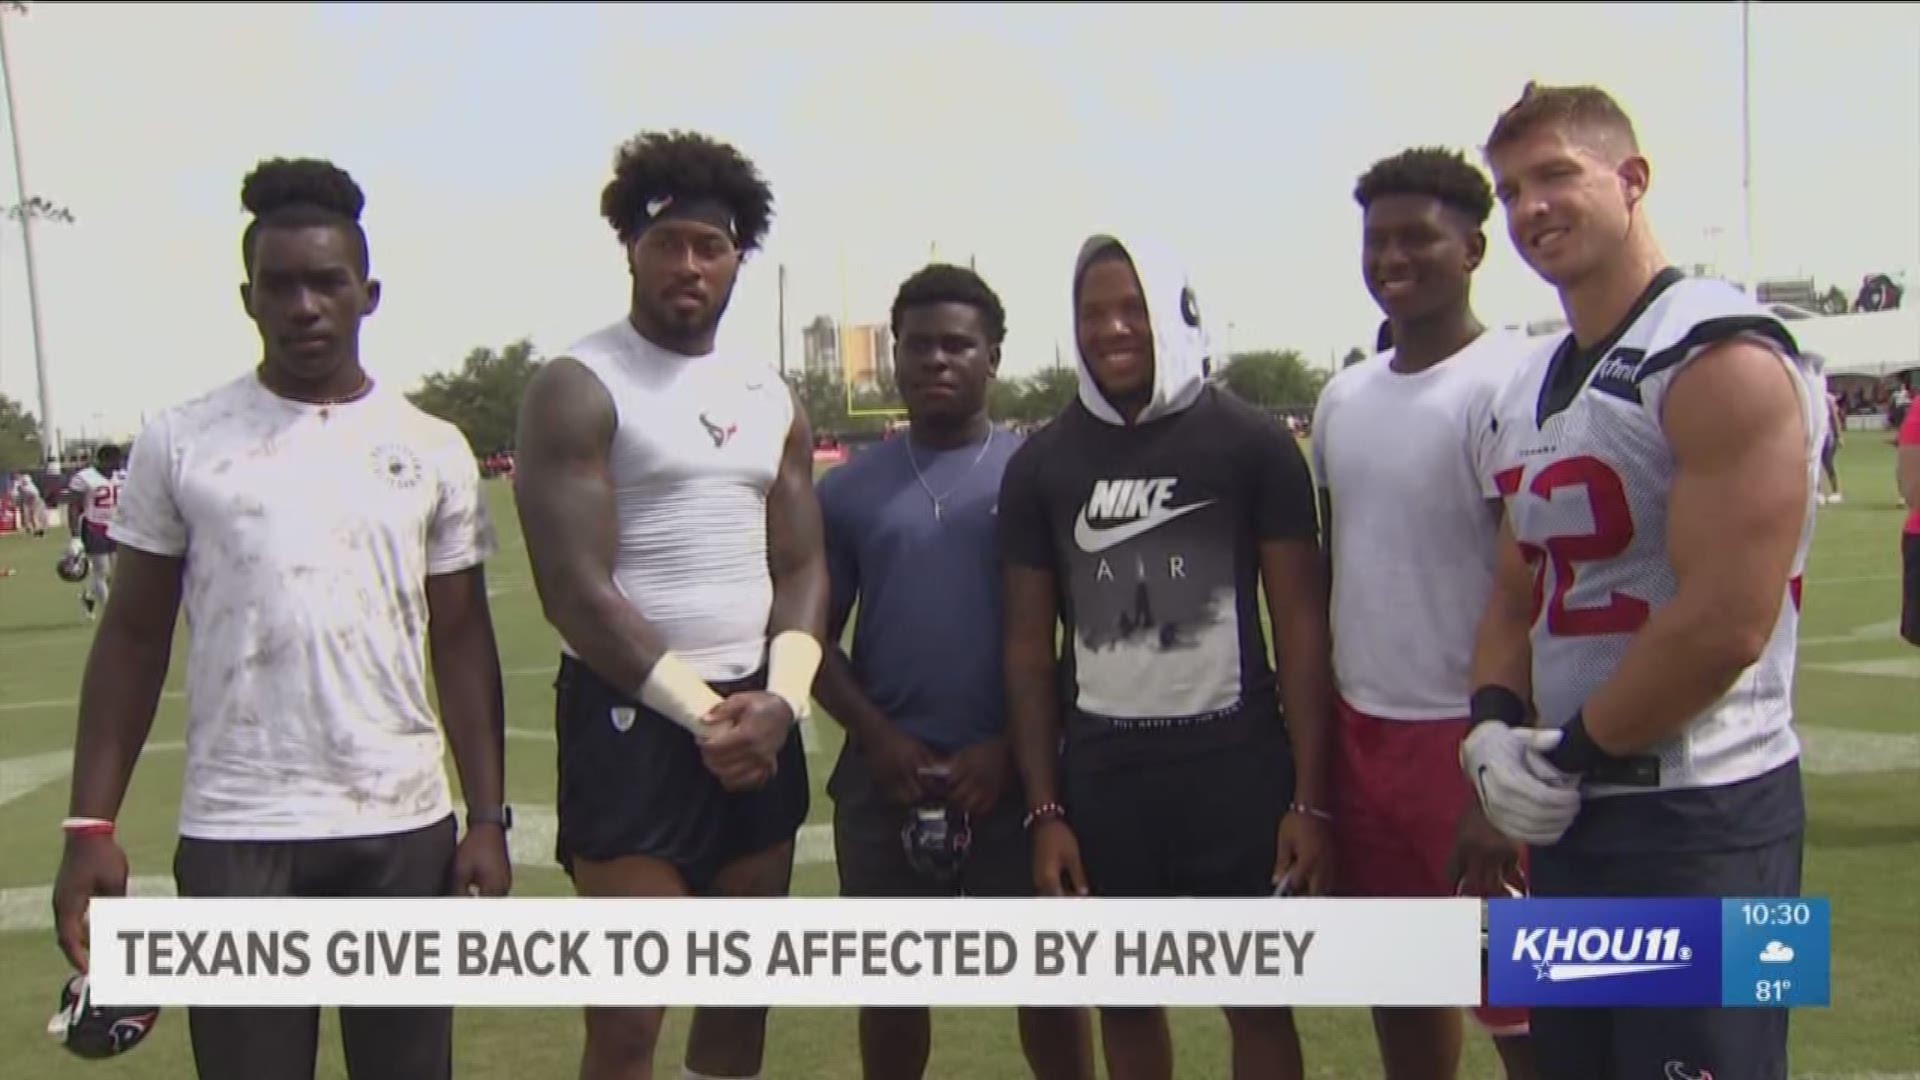 The Houston Texans hosted football players from C.E. King High School who lost everything during Hurricane Harvey.